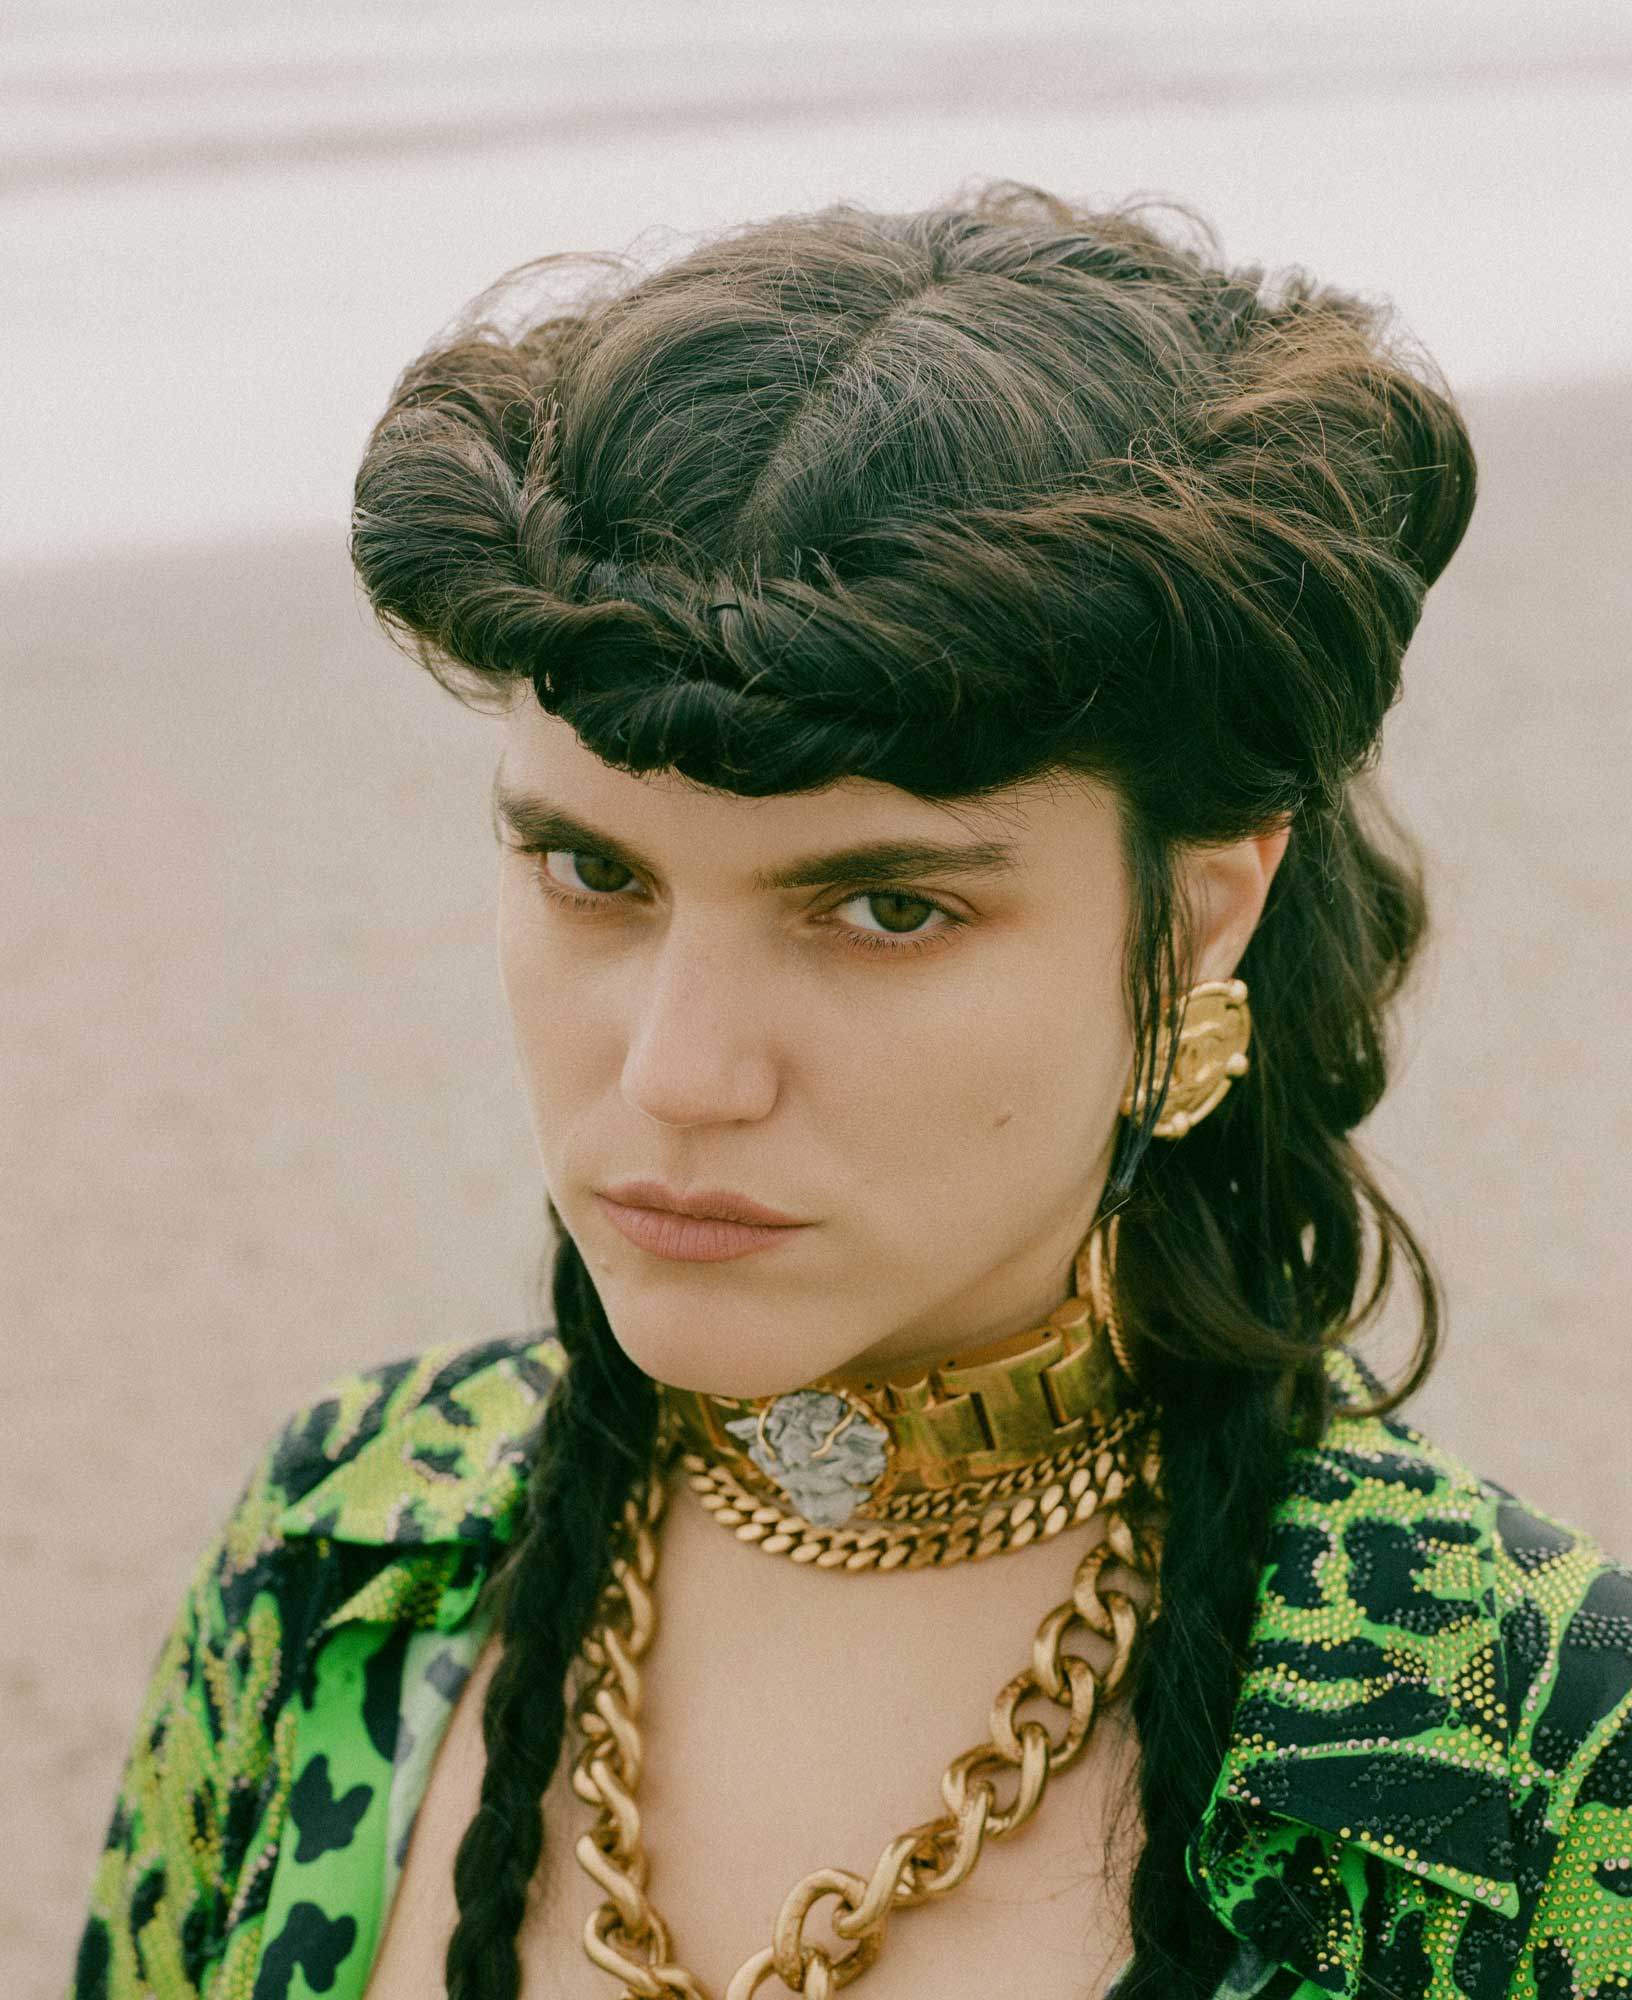 LADYGUNN x SOKO, Magazine Issue No. 20 in Chanel and Versace